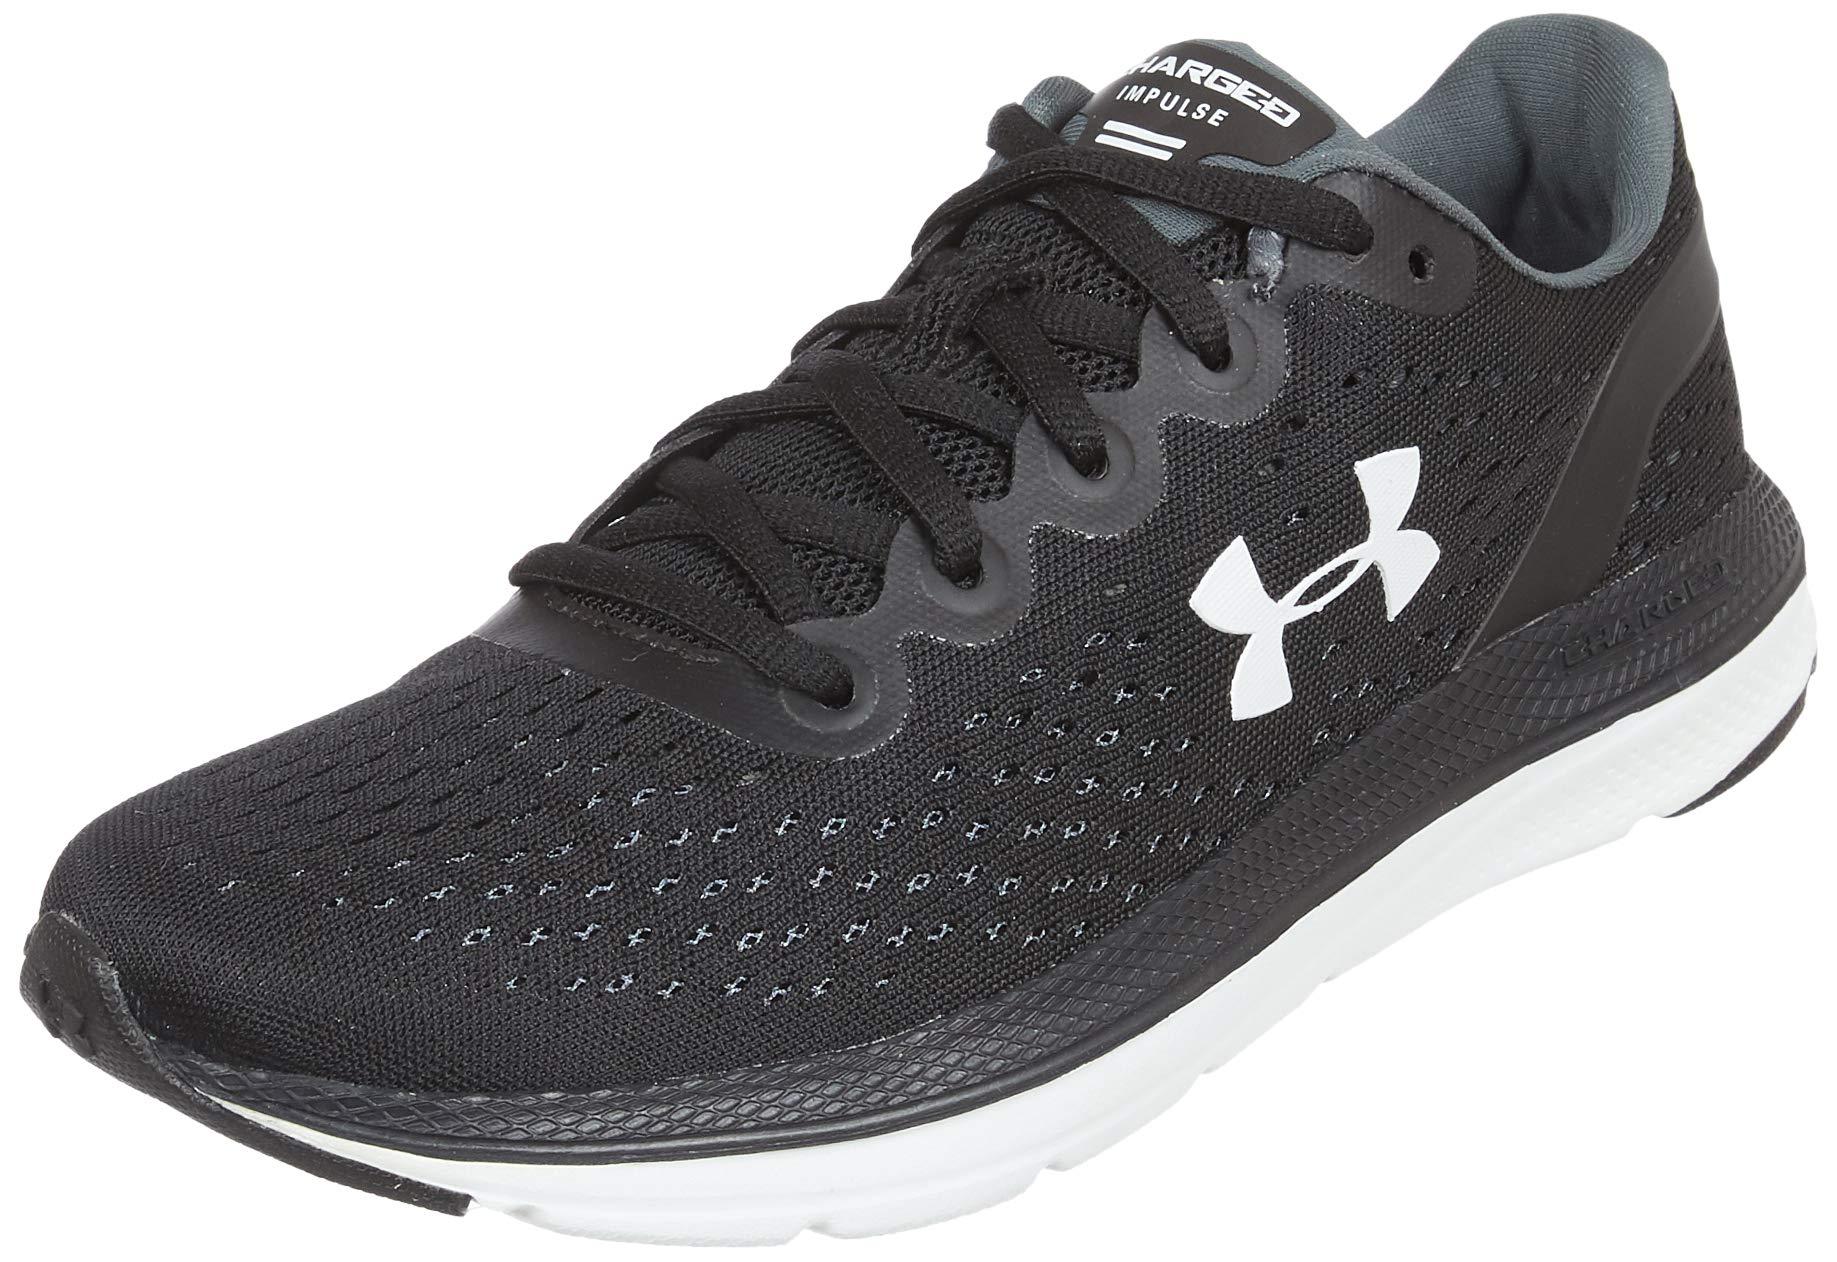 Under Armour Rubber Charged Impulse Running Shoe, Black (002)/white, 9. ...